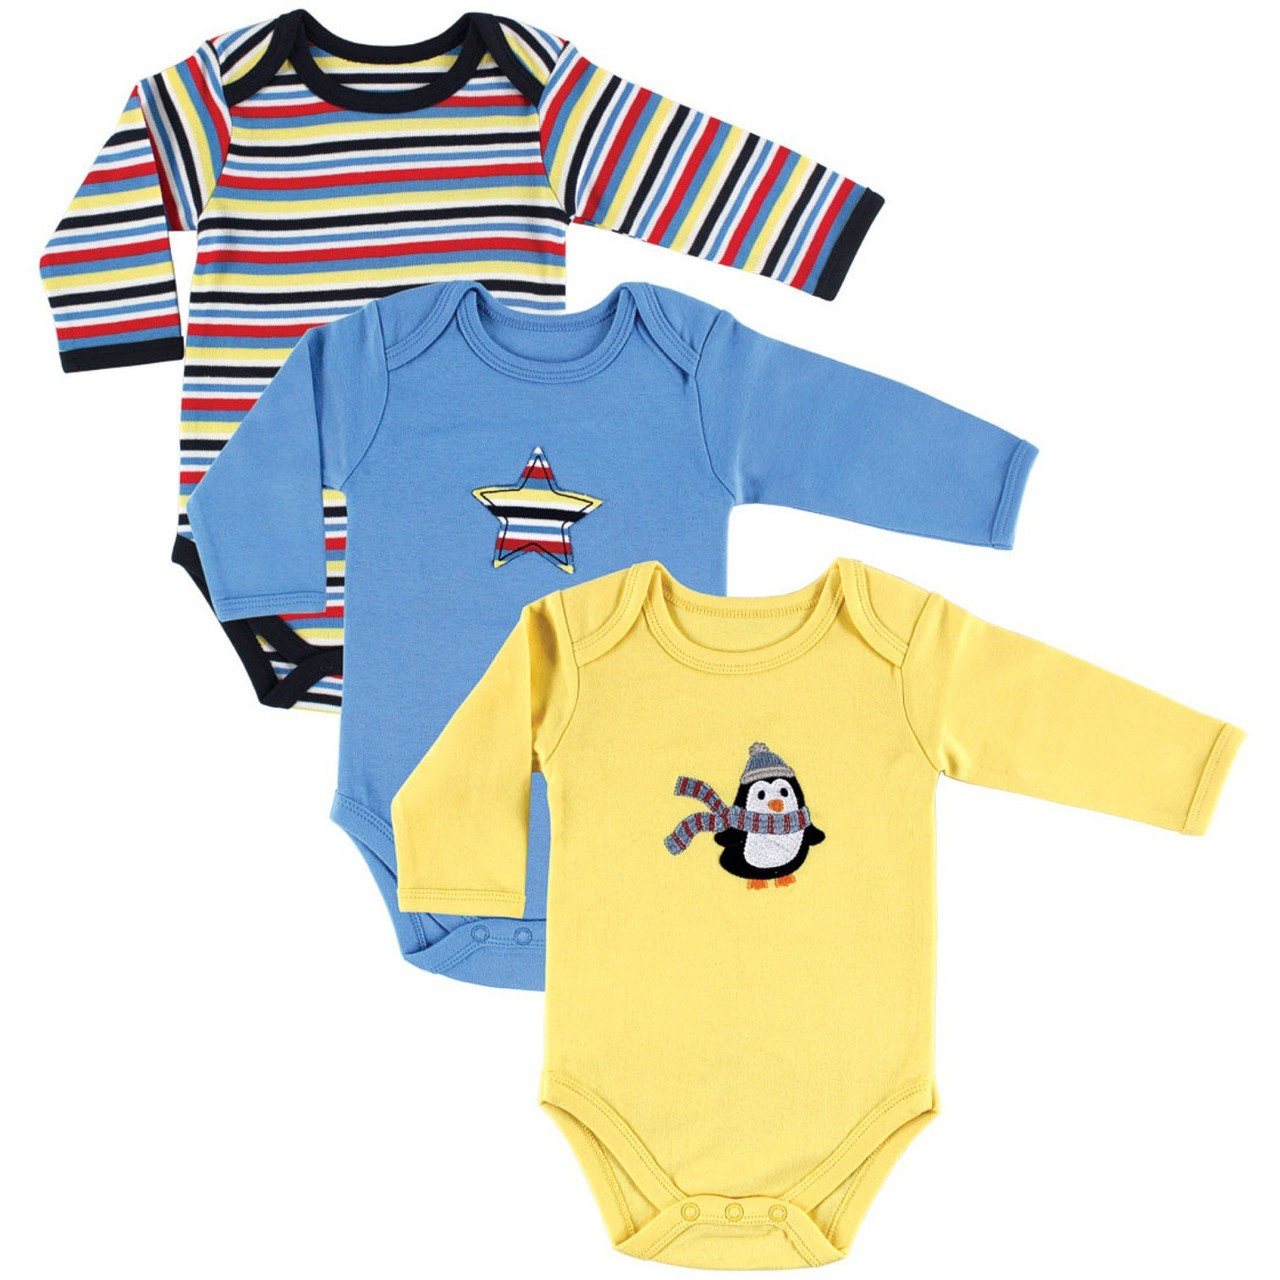 Hudson Baby Long Sleeve Bodysuits, 3-Pack, Penguin | Baby and Toddler ...